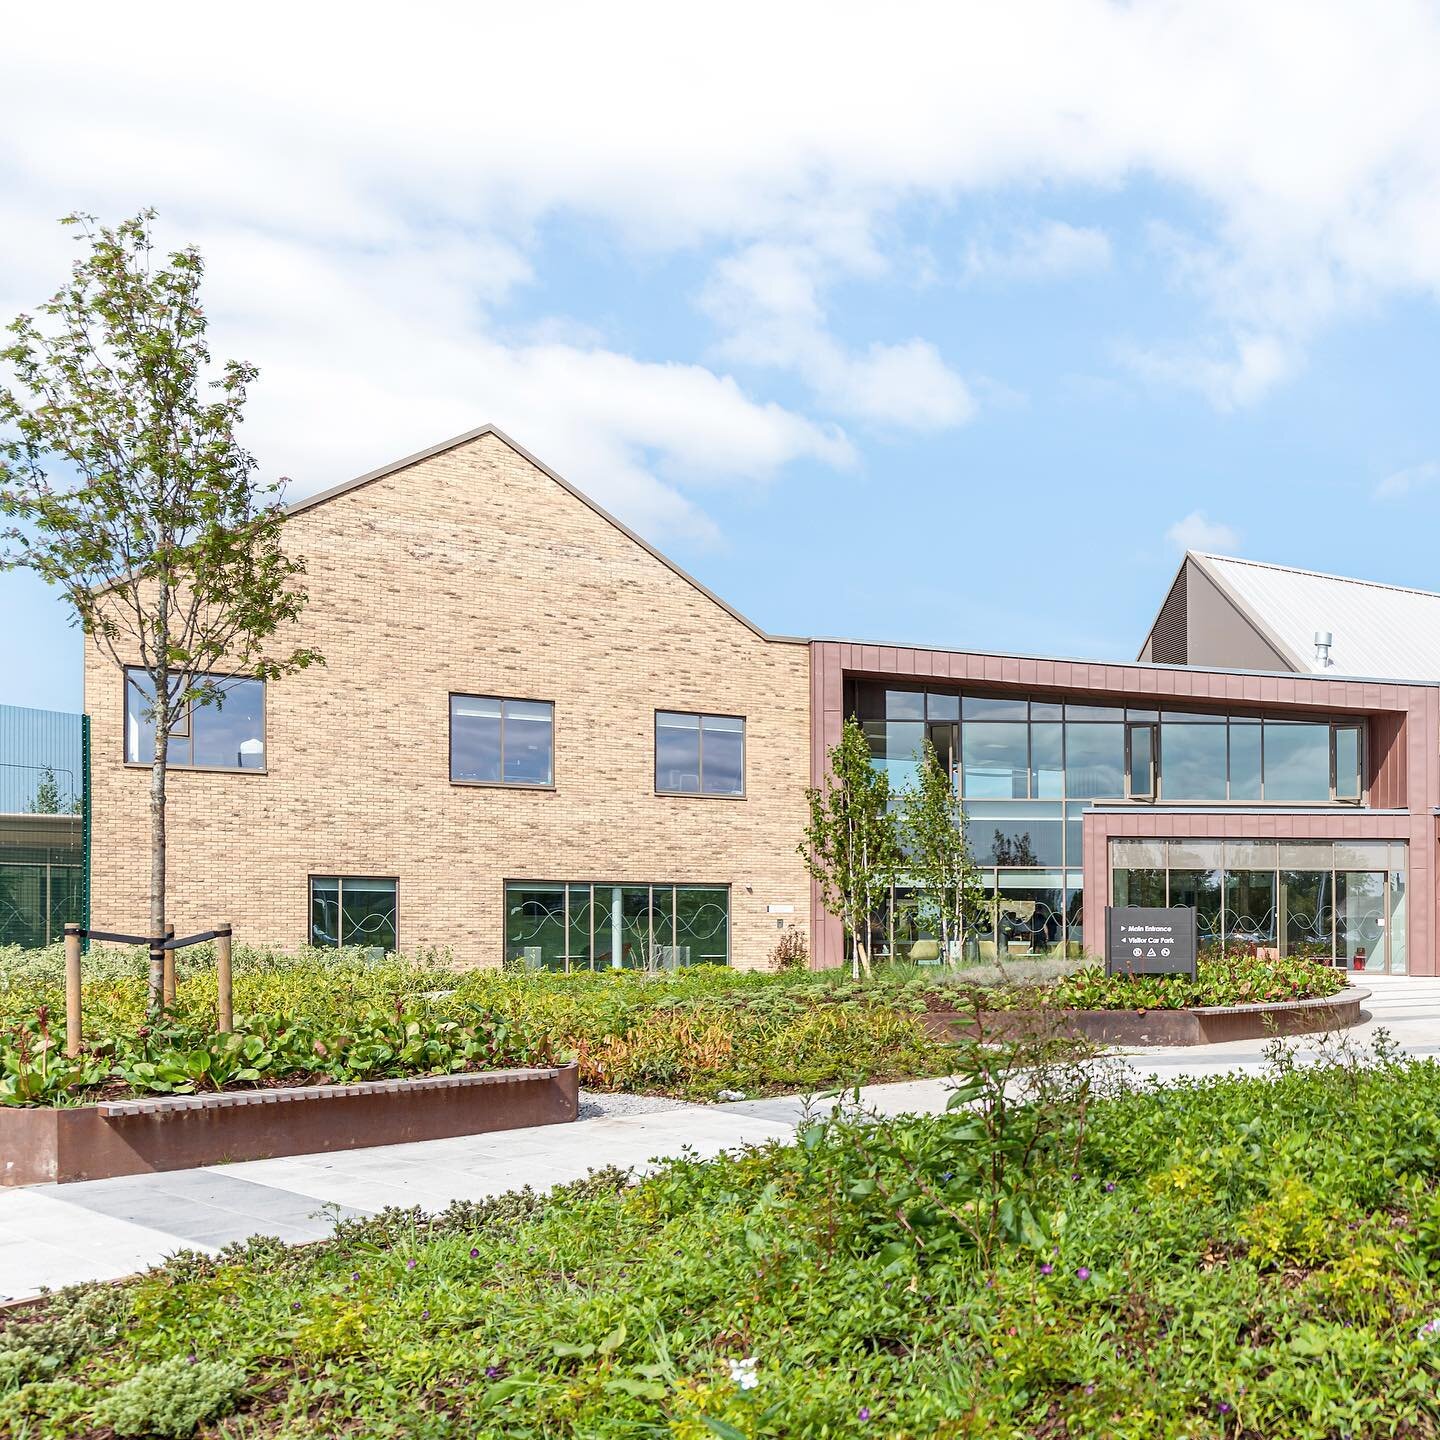 HMP &amp; YOI Stirling is a new state of the art facility for the Scottish Prison Service for Women in custody in Scotland, and replaces the recently closed HMP Cornton Vale. The design pioneers a therapeutic approach to prisoner care with wellbeing 